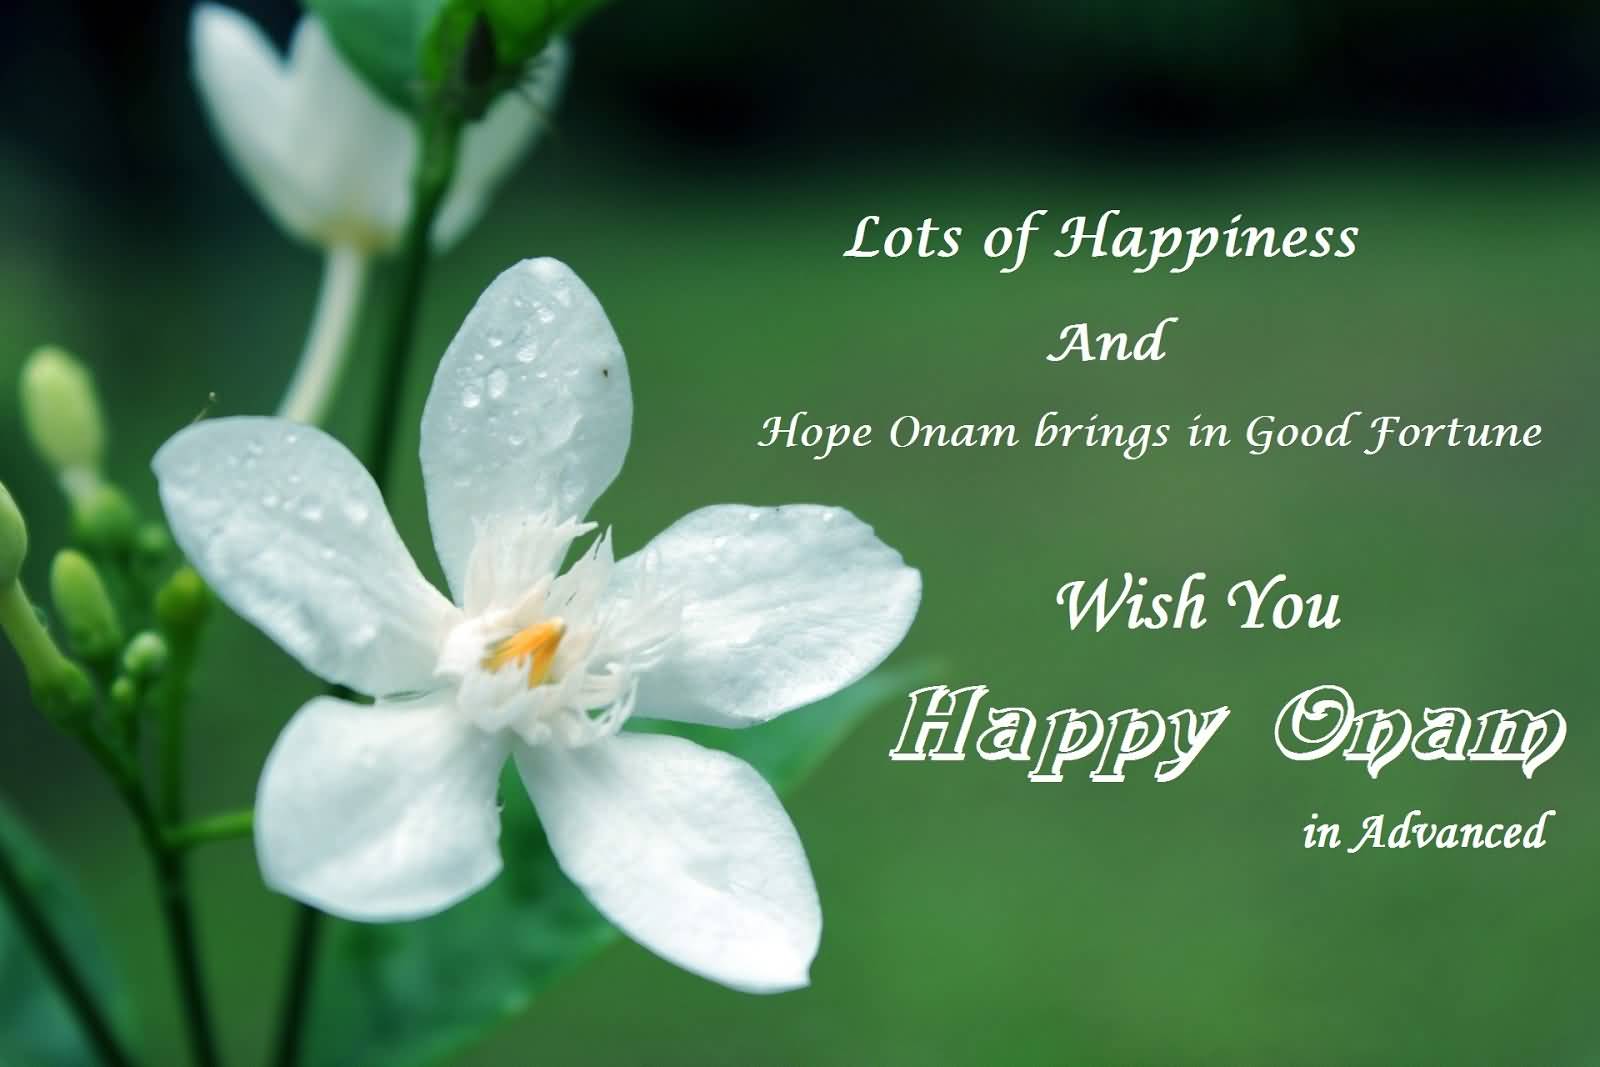 Lots Of Happiness And Hope Onam Brings In Good Fortune Wish You Happy Onam In Advanced